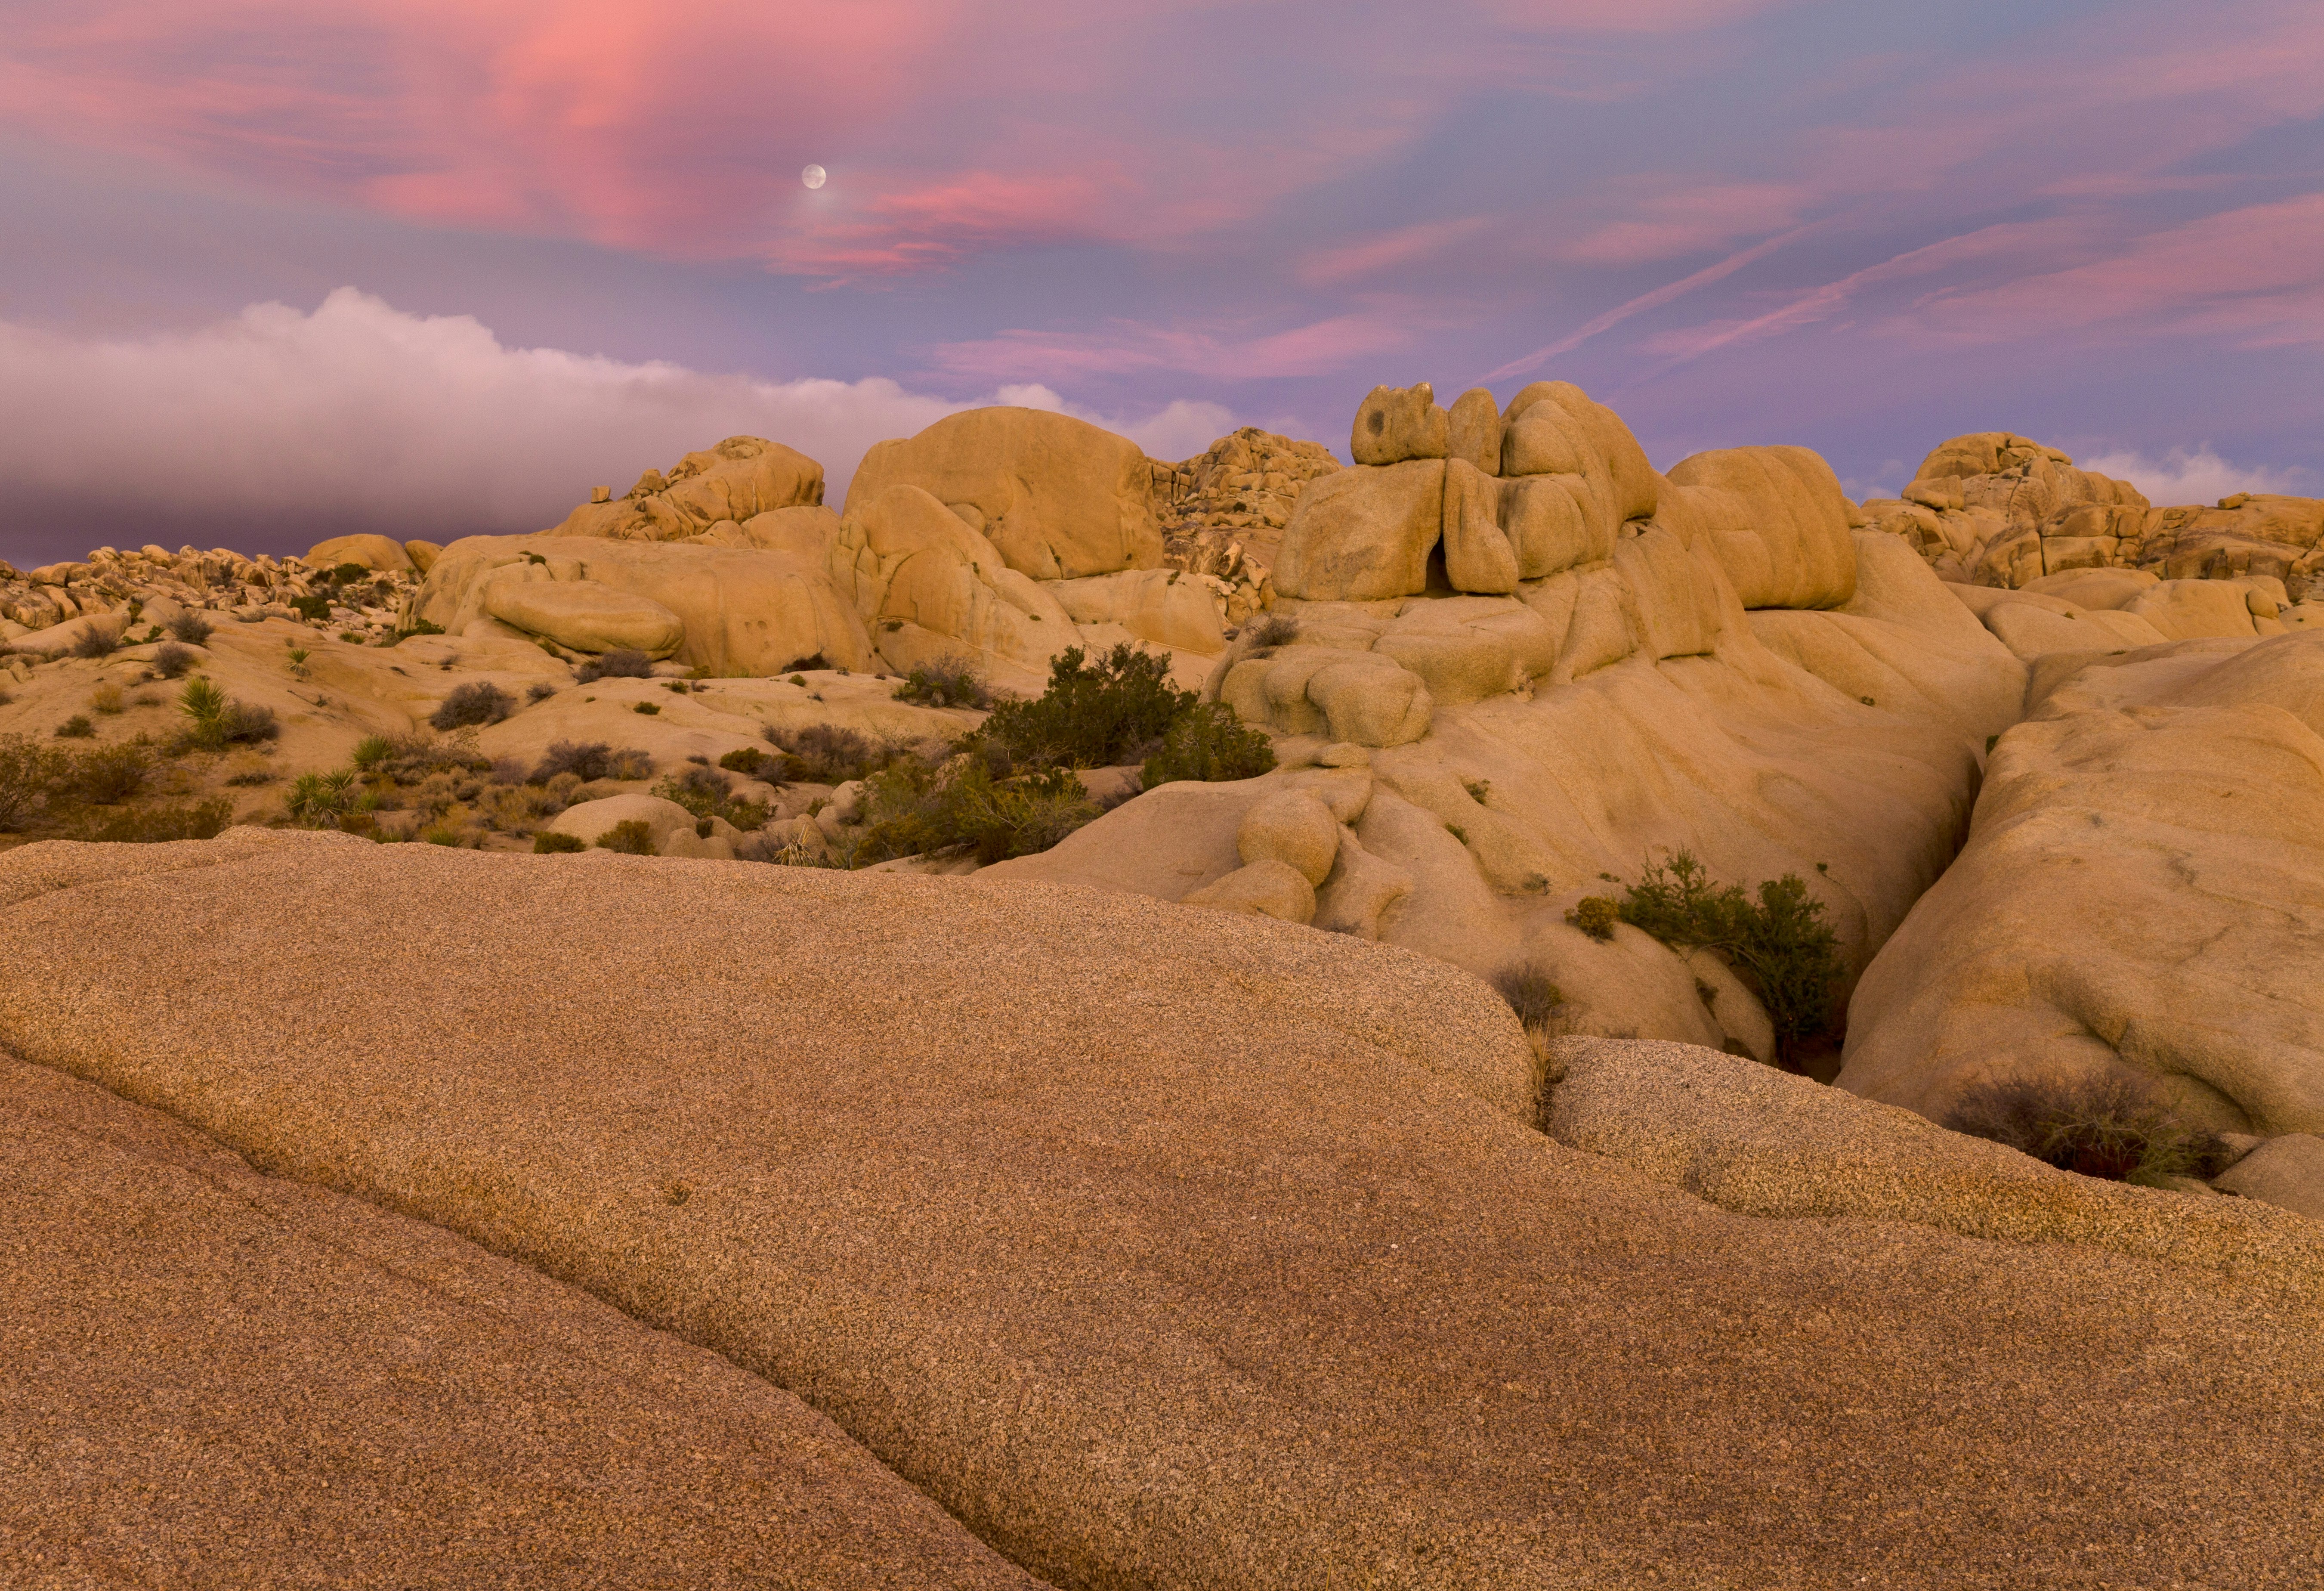 A pastel pink and lavender sunset tints the sky over the jumbo rocks in buff, tan, and light orange shades that make up the desert floor of Joshua Tree National Park